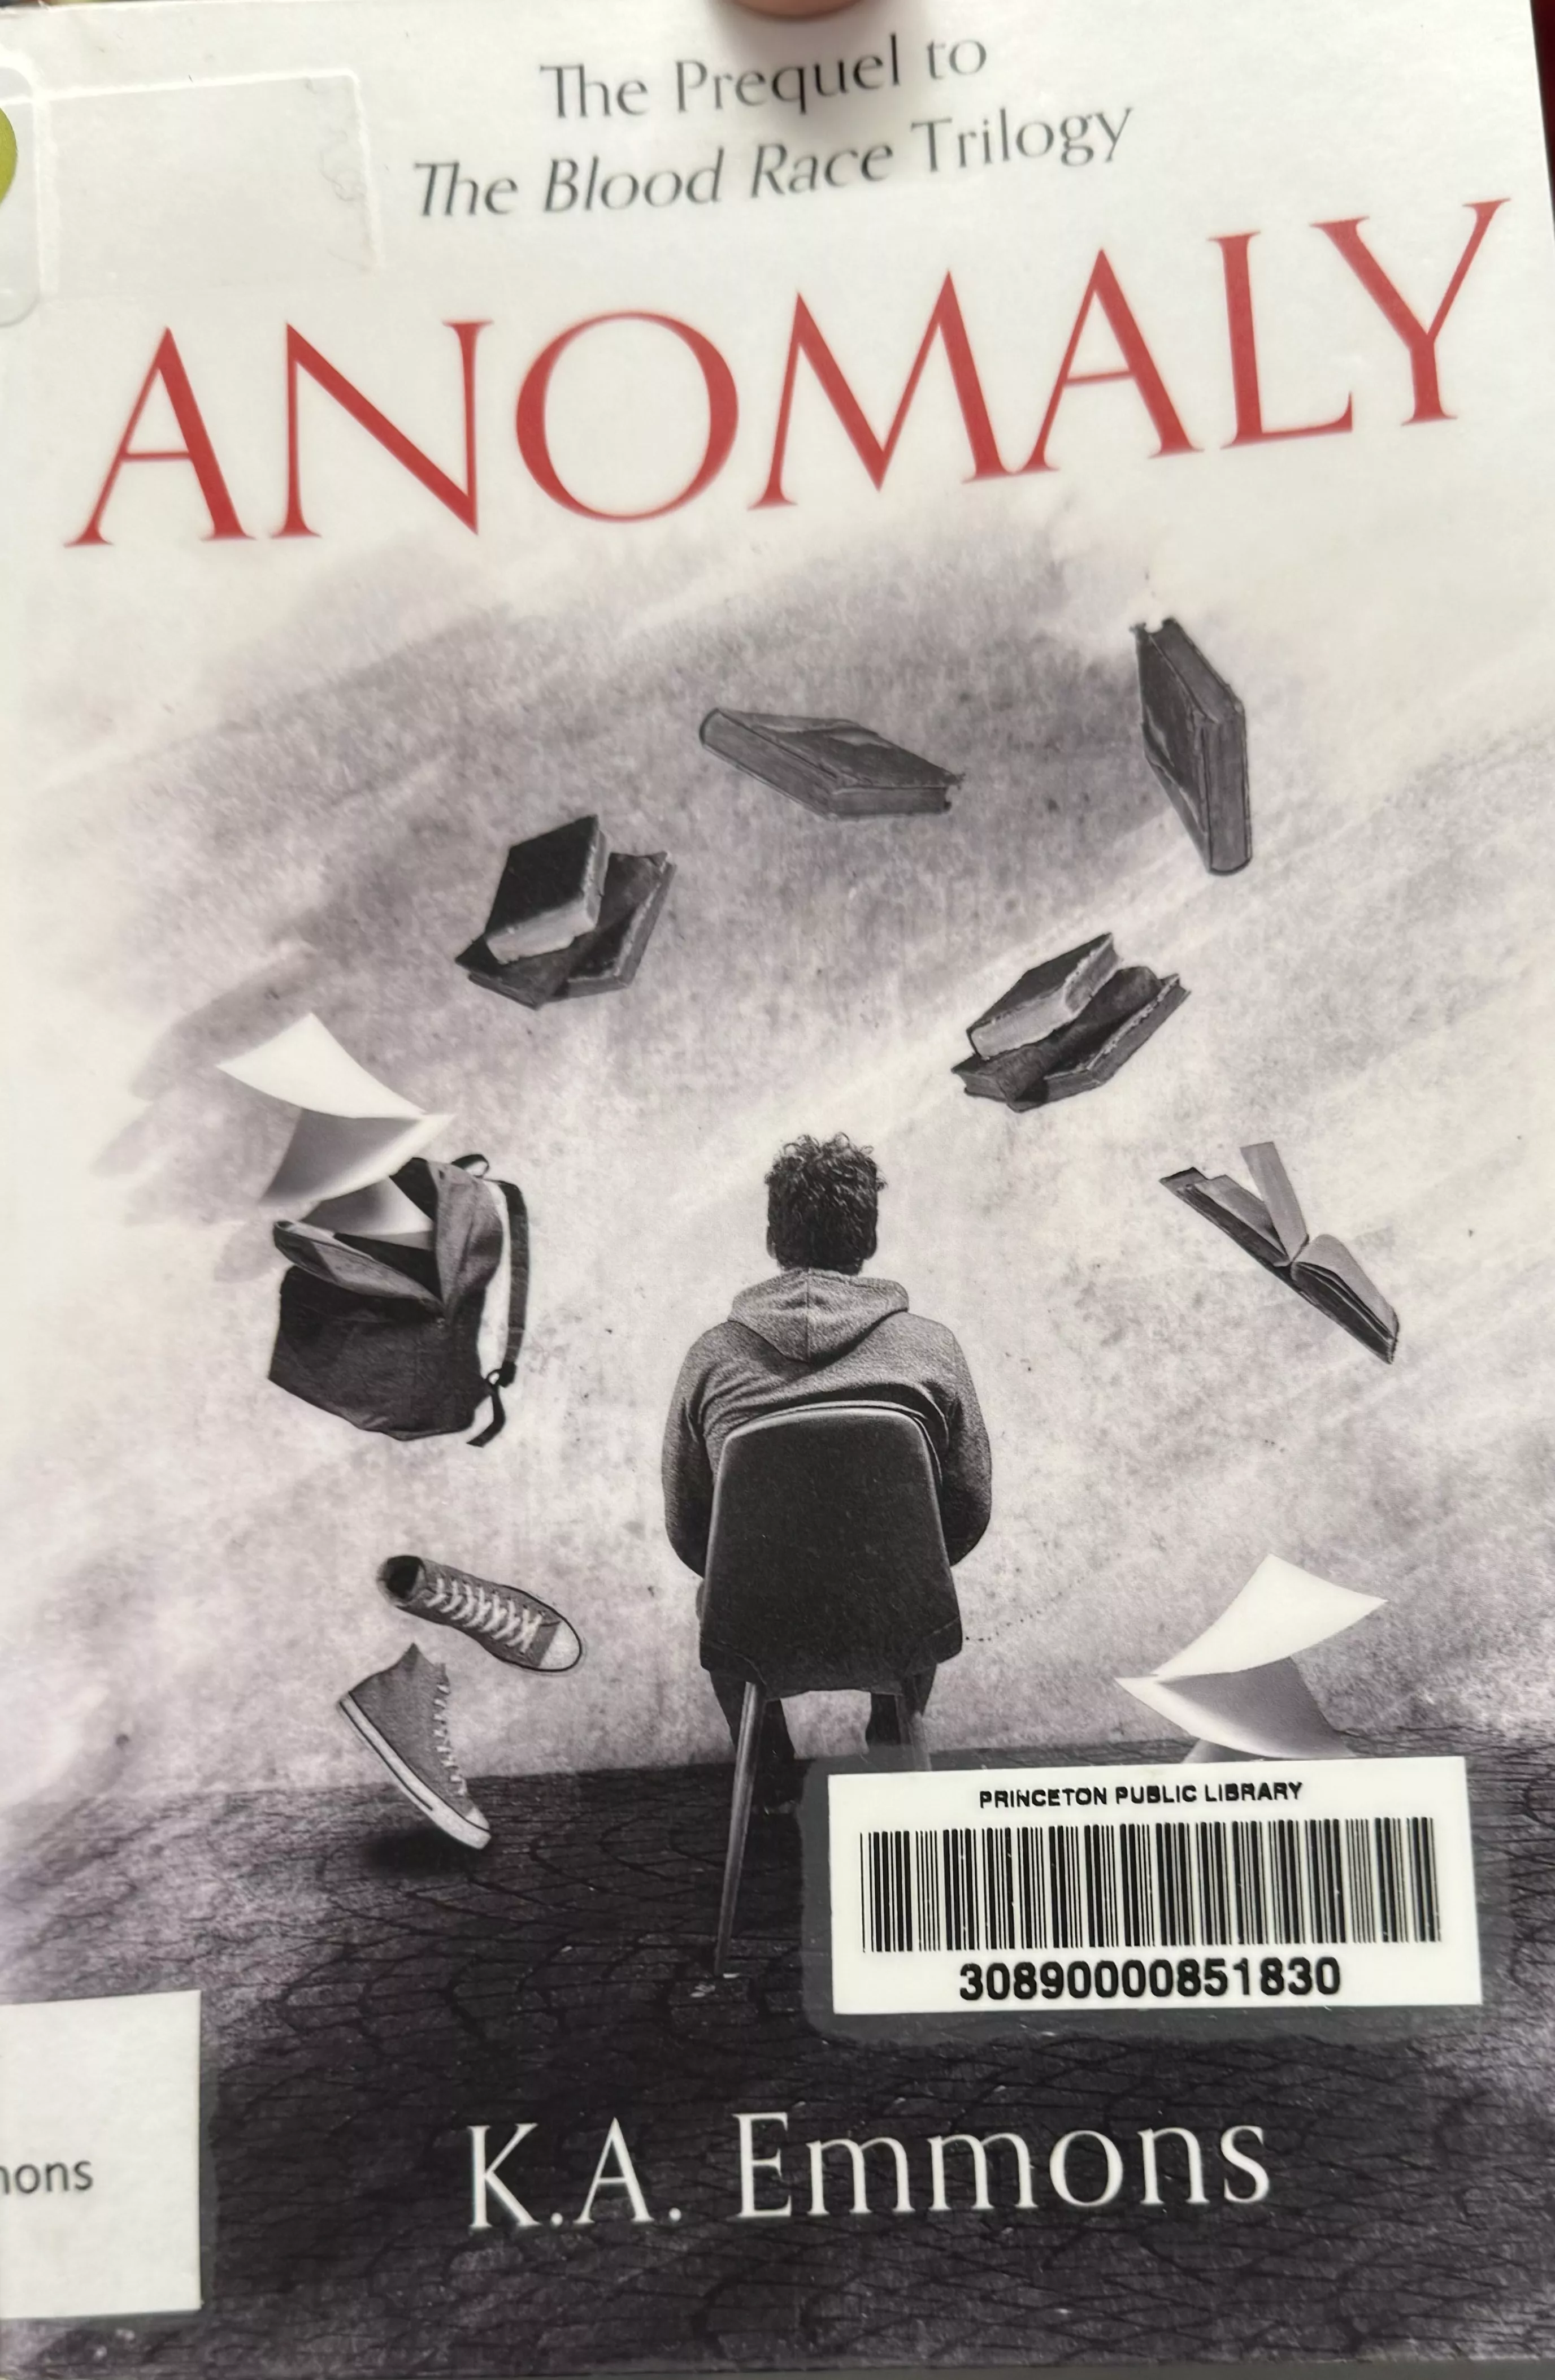 book jacket for anomaly by K. A. Emmons